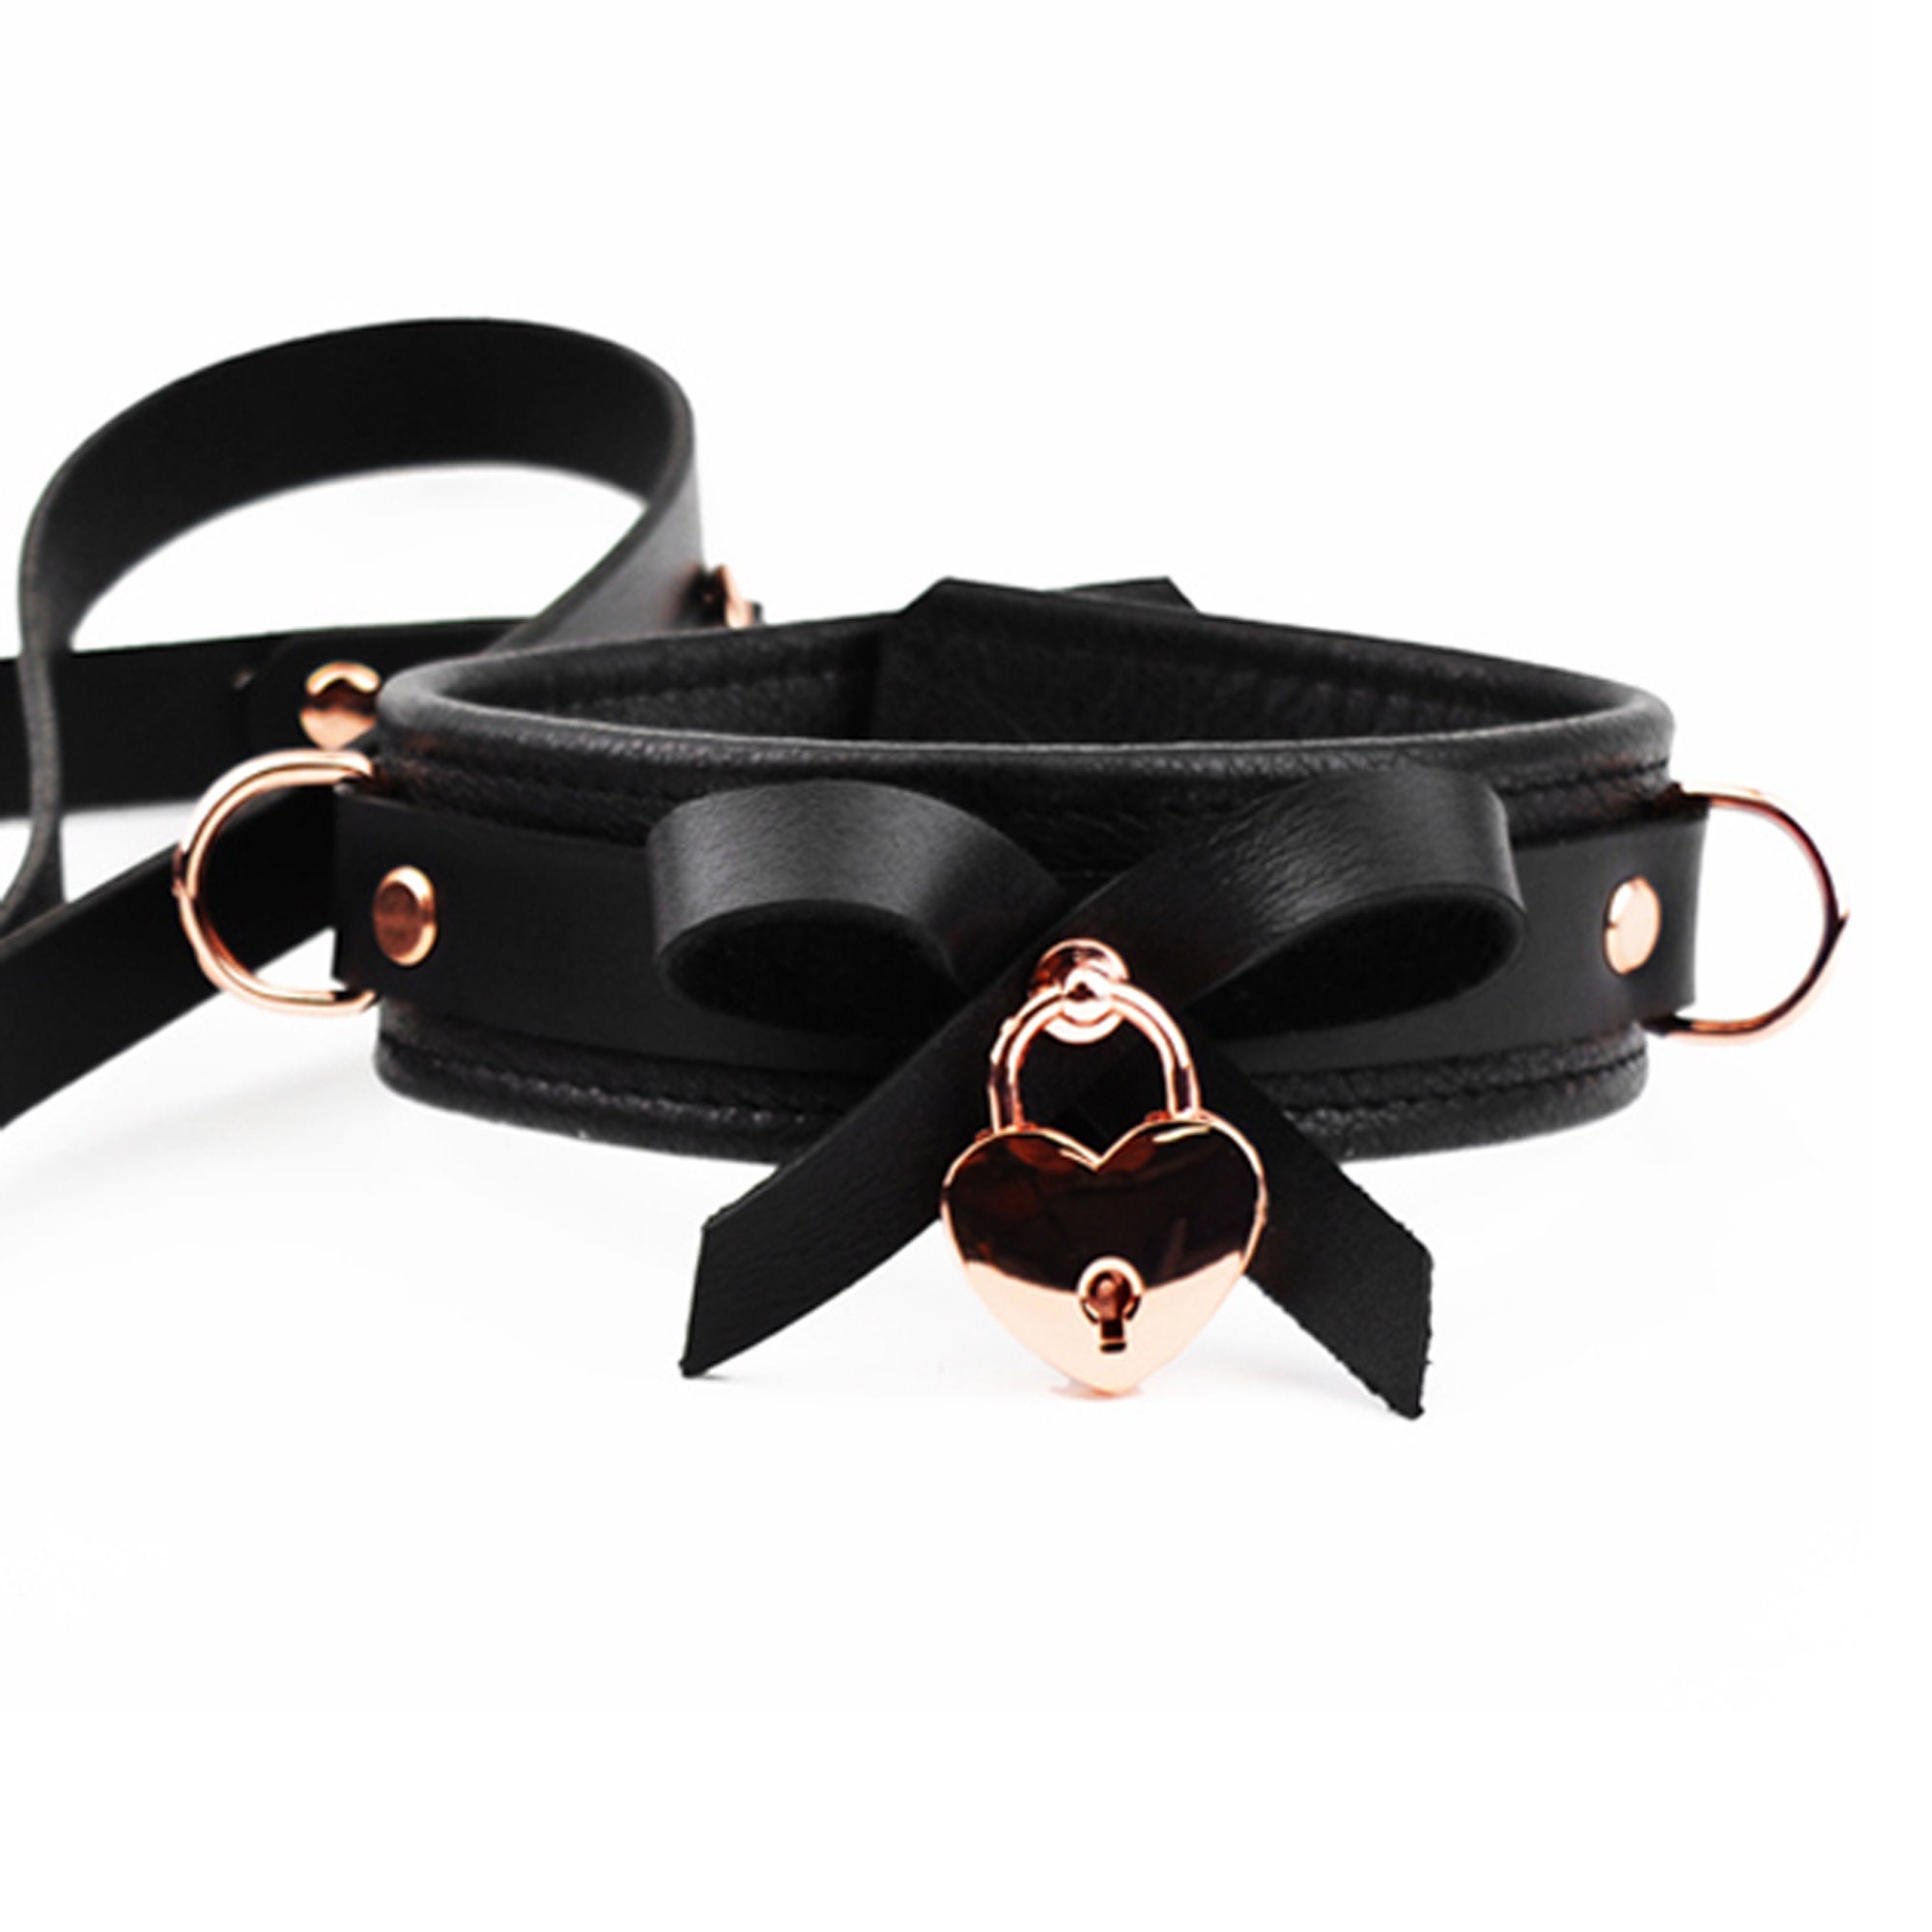 Don't be fooled. The 3 questions for 'luxury' leather dog collar